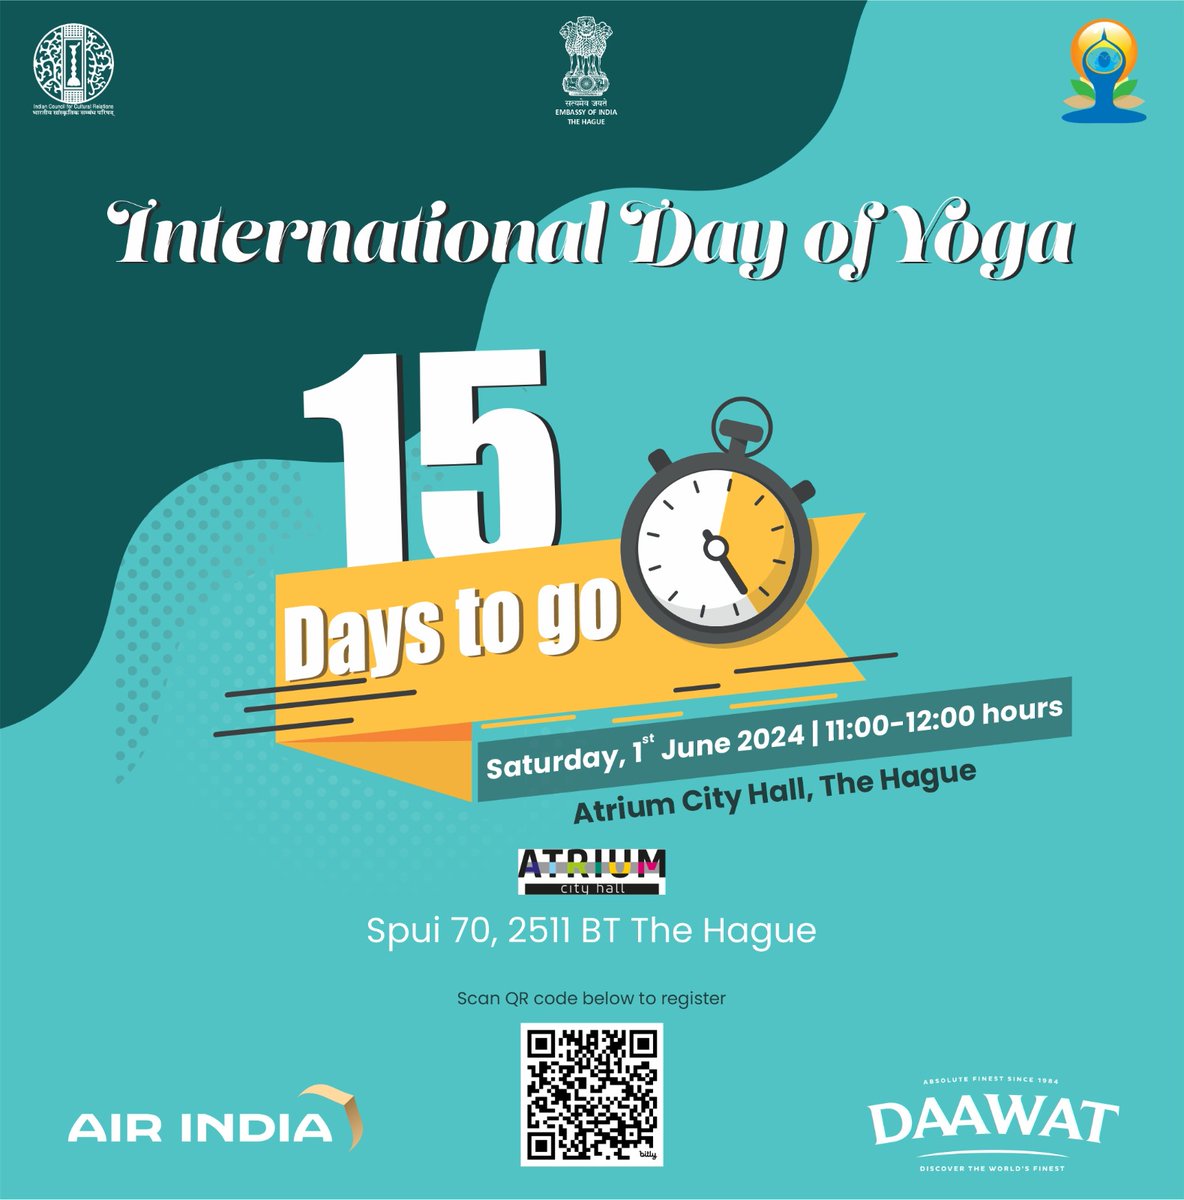 With just 15 days to go, Embassy of India is gearing up to celebrate the countdown to the #internationalDayOfYoga with great exuberance!
Please join us on Saturday, 1 June @AtriumCityHall 

Register @ bit.ly/4b7fWIY
or scan QR code👇